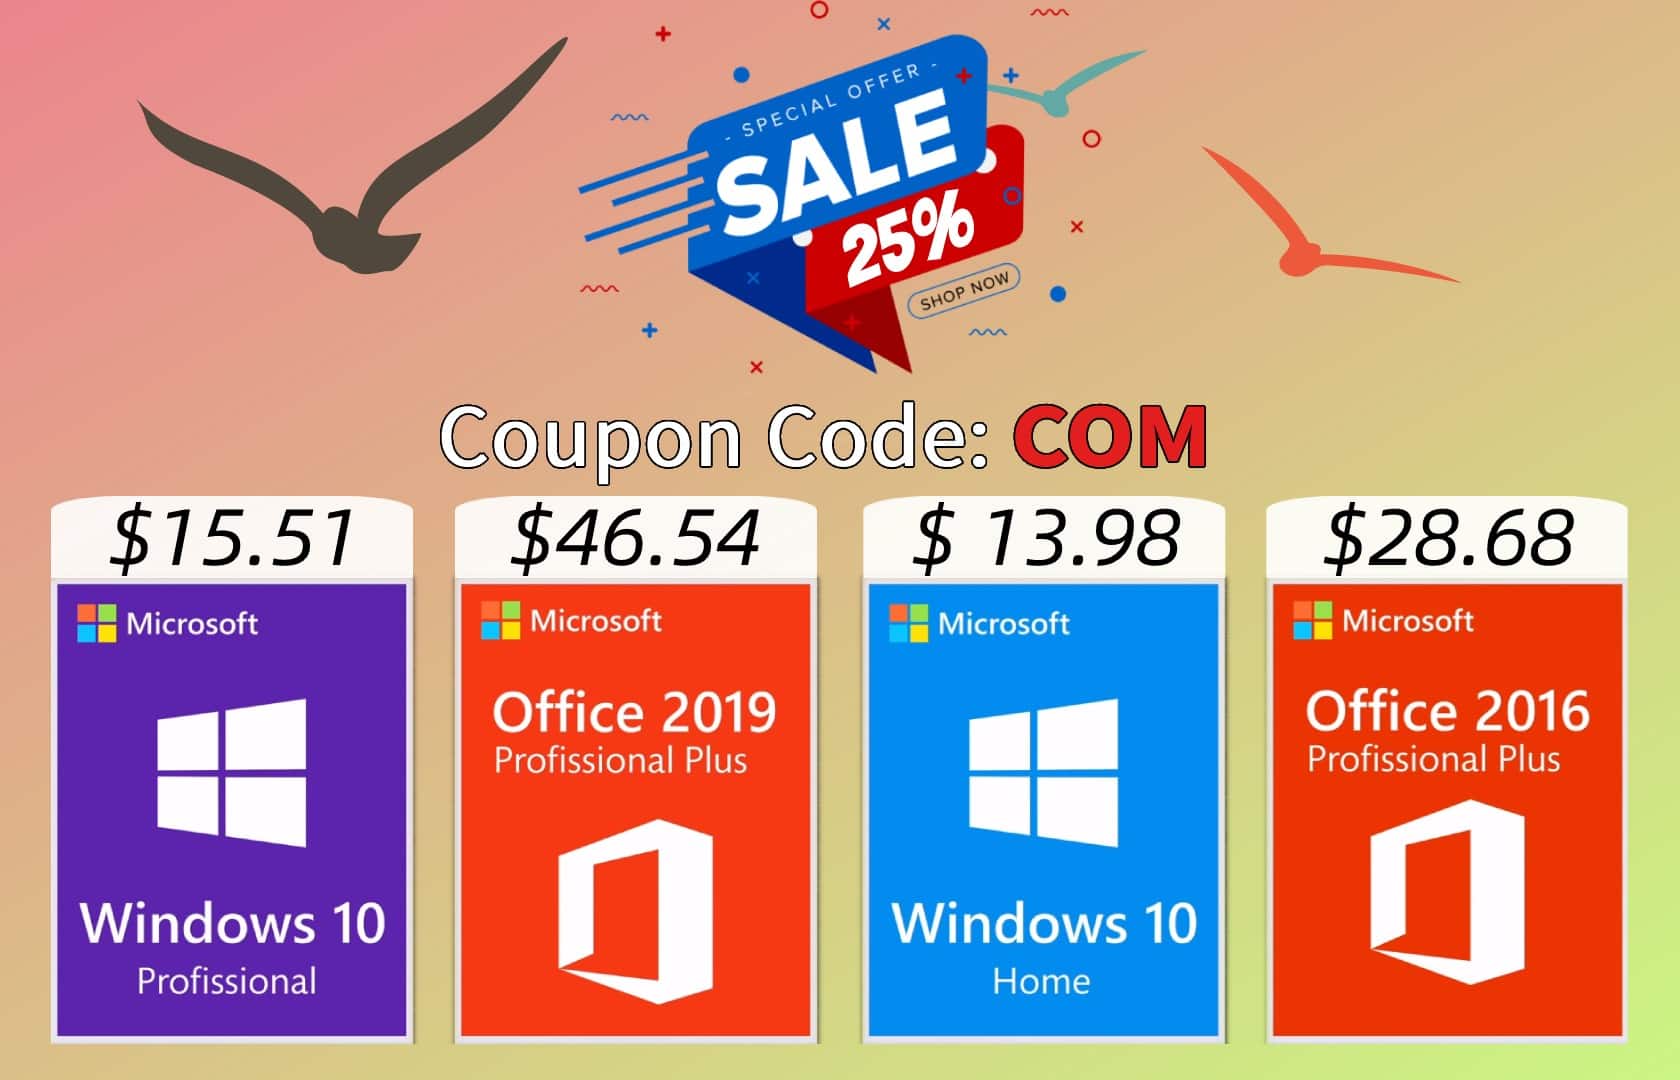 If you'd like to save money on genuine Microsoft software, head to Keysbuff.com using the links above. And don't forget to enter promo code COM to get extra savings.